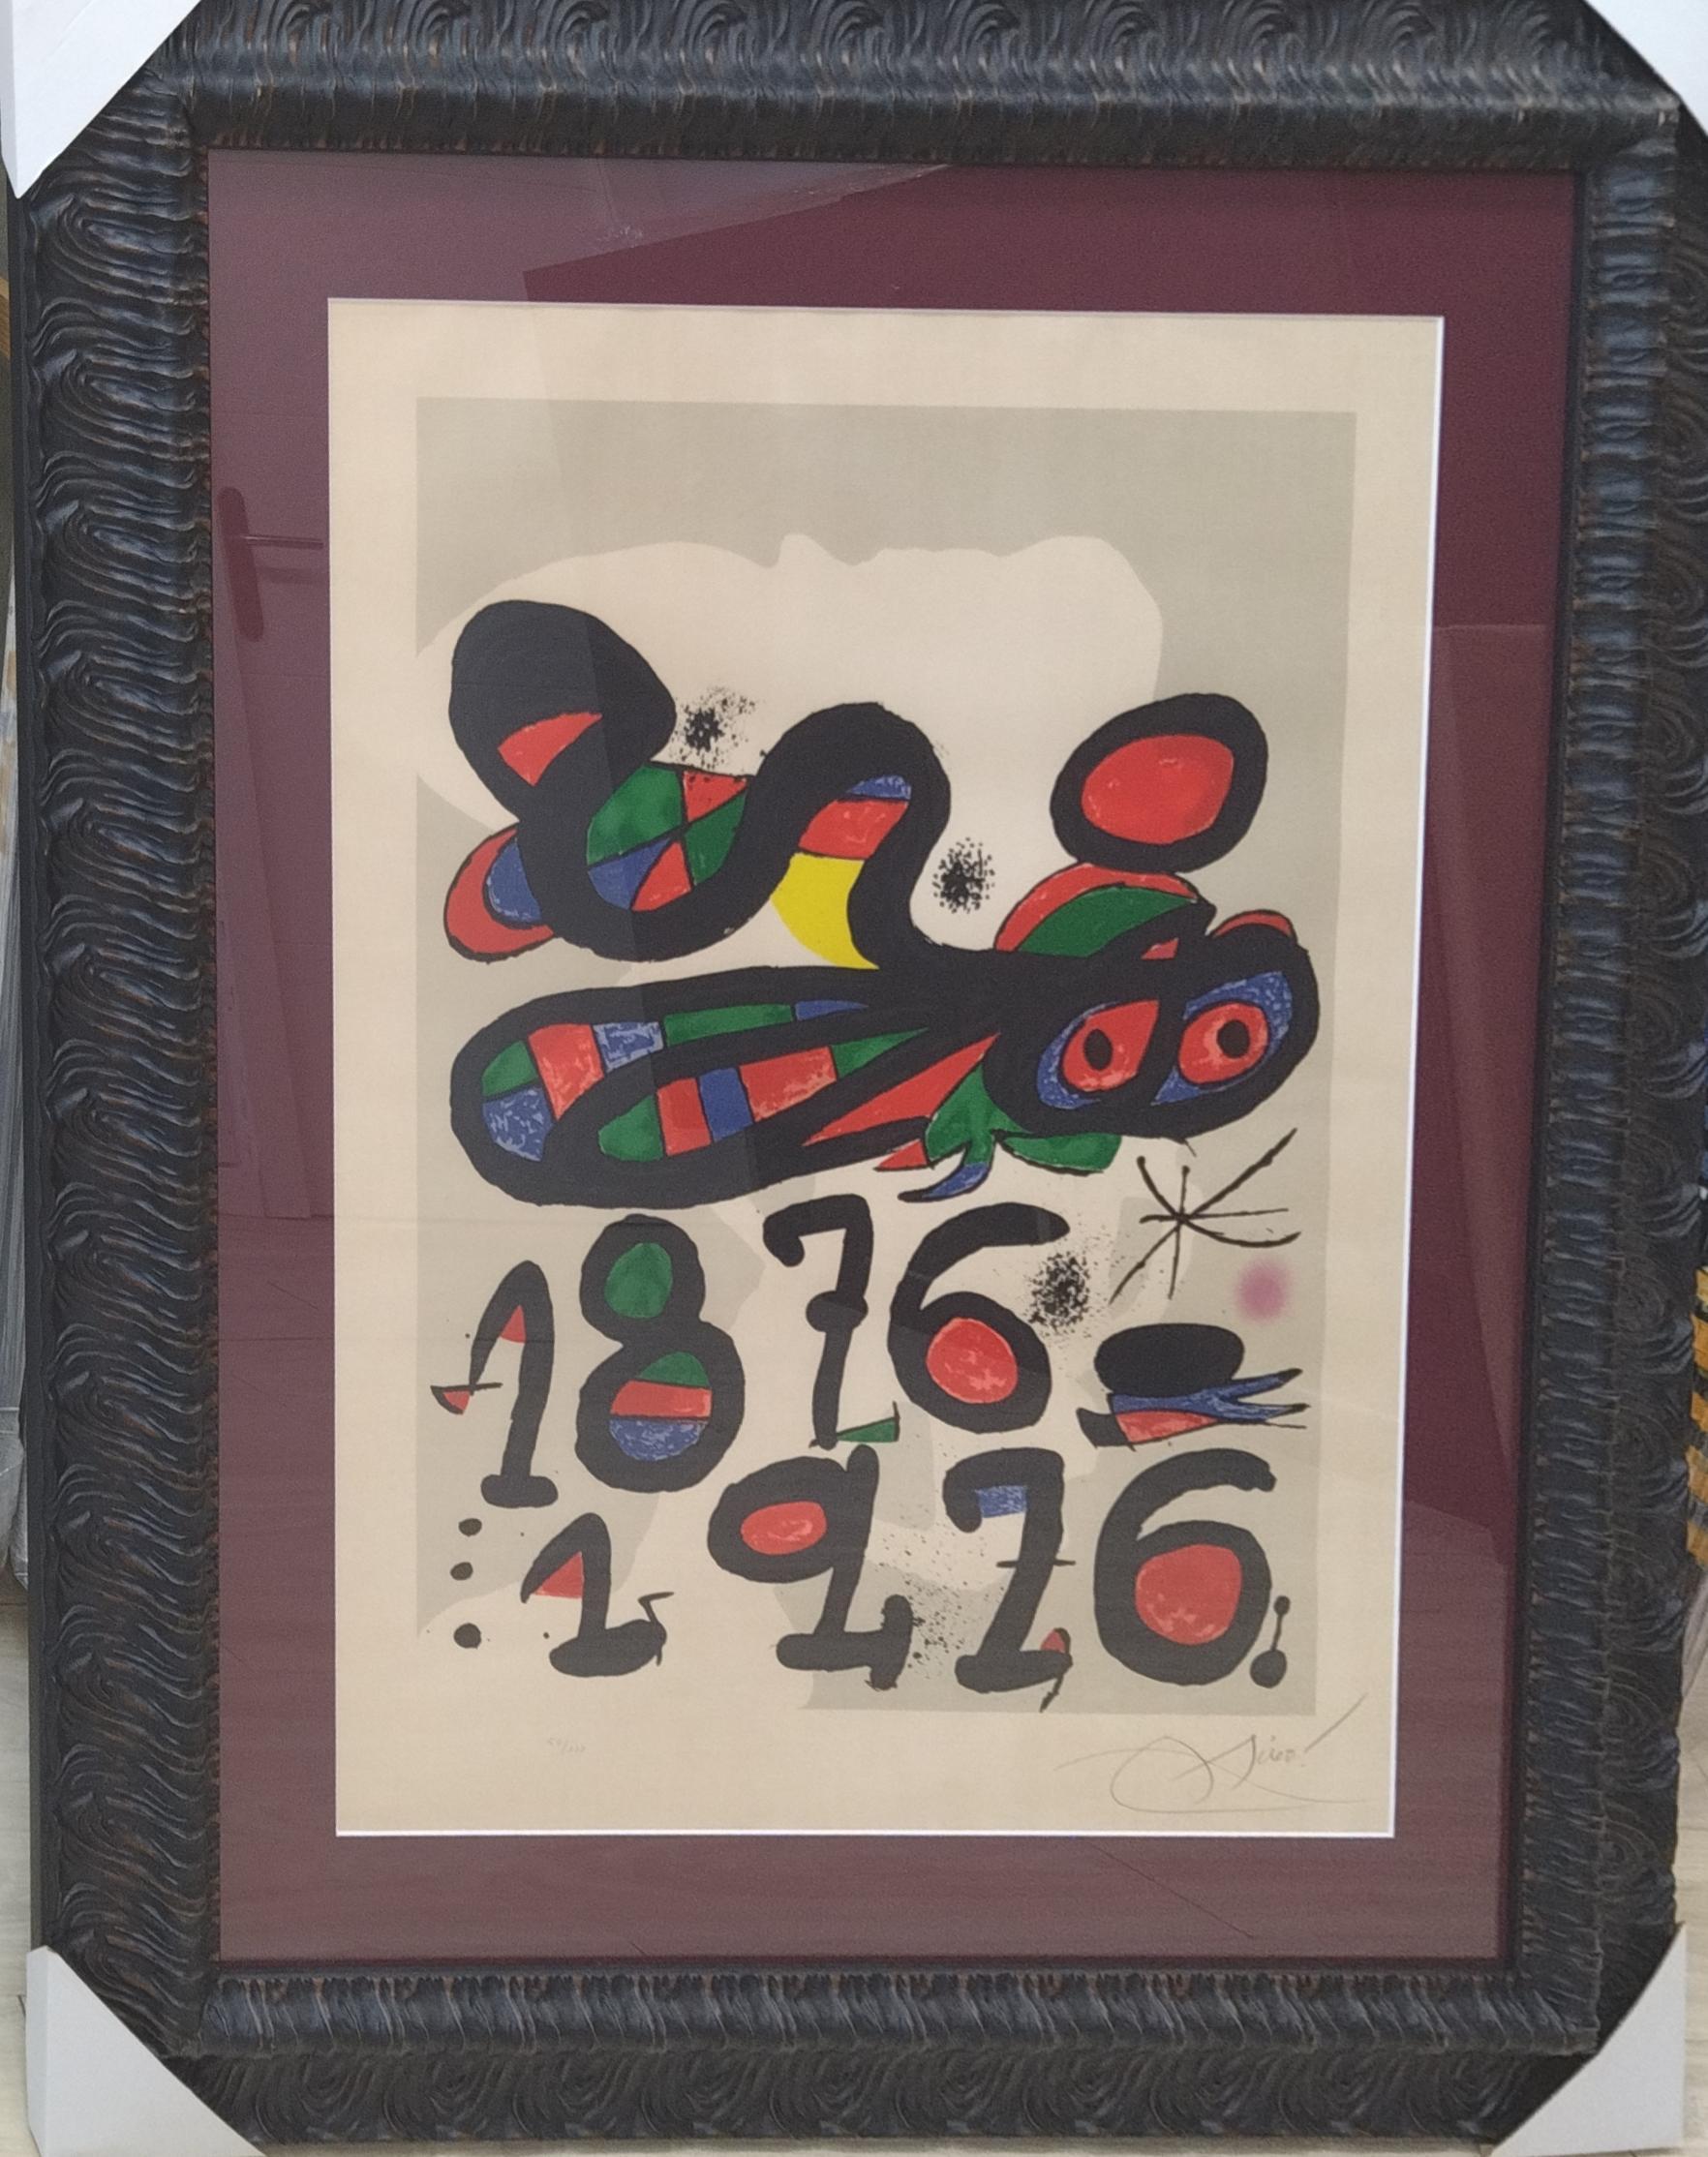 Joan Miró Abstract Print - Miro   Numbers  Letters  Red  Black  Vertical CENTRE EXCURSIONISTA. LITOGRAFIA